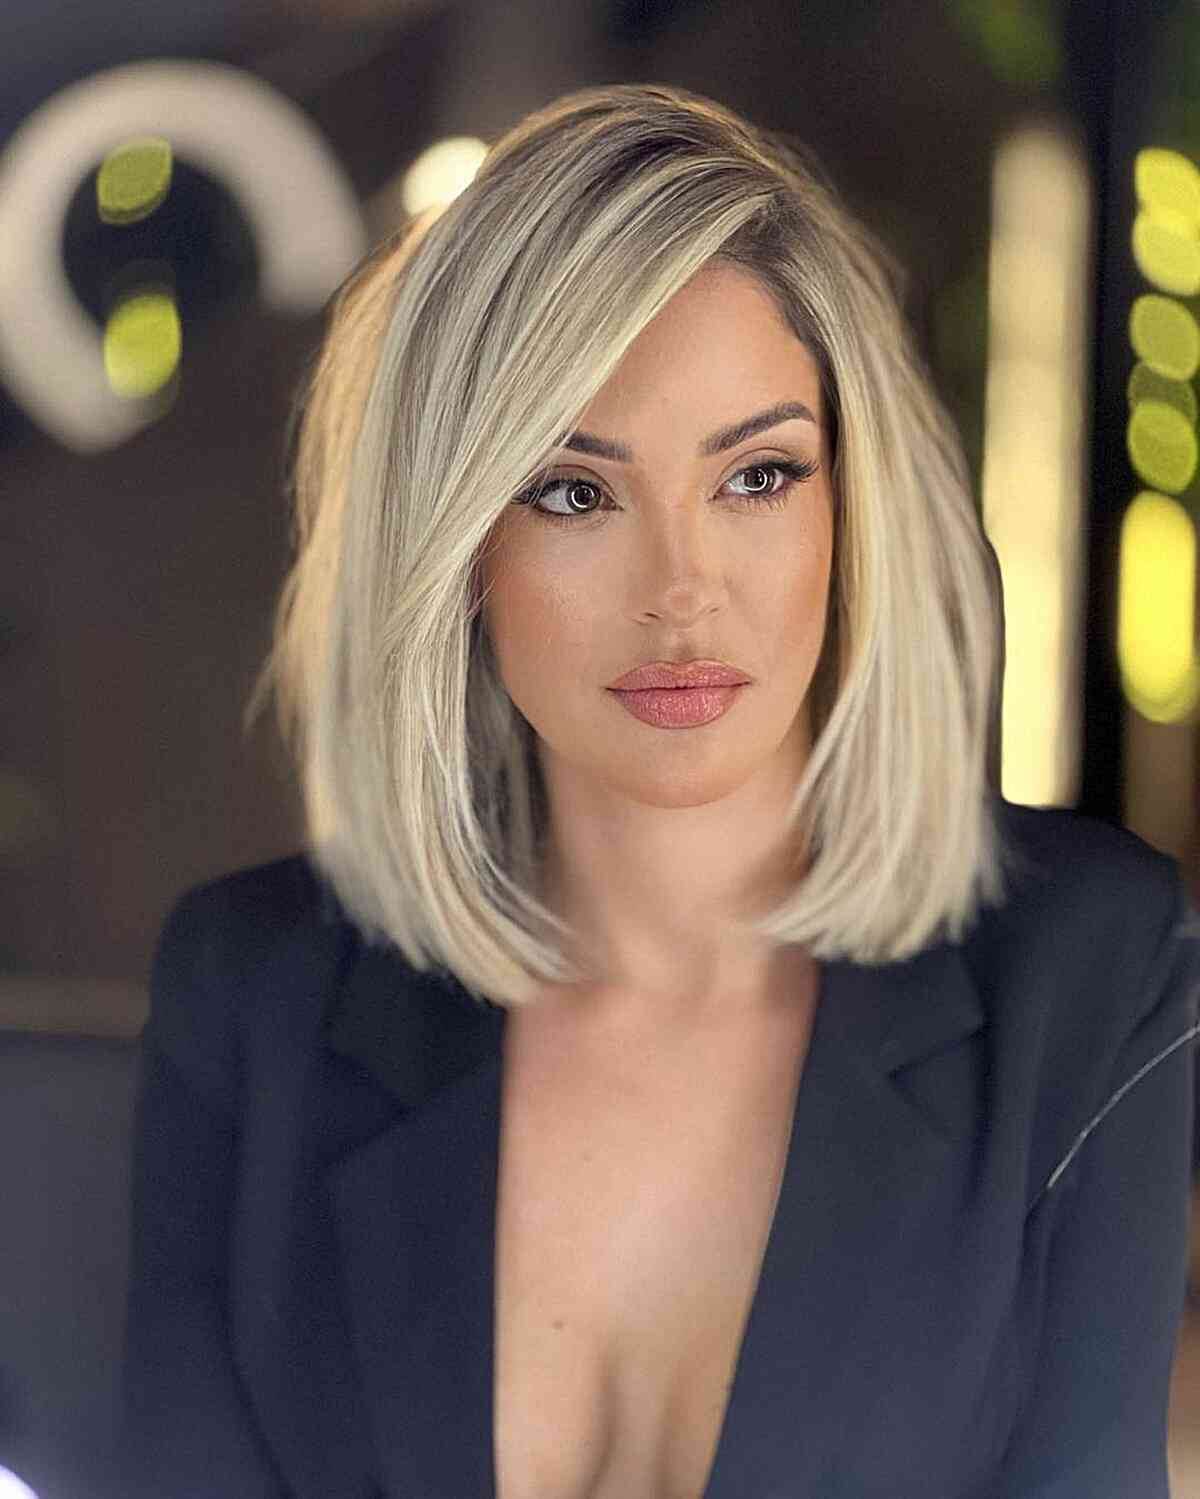 50 Professional Business Hairstyles to Style in 2022 (with Pictures)